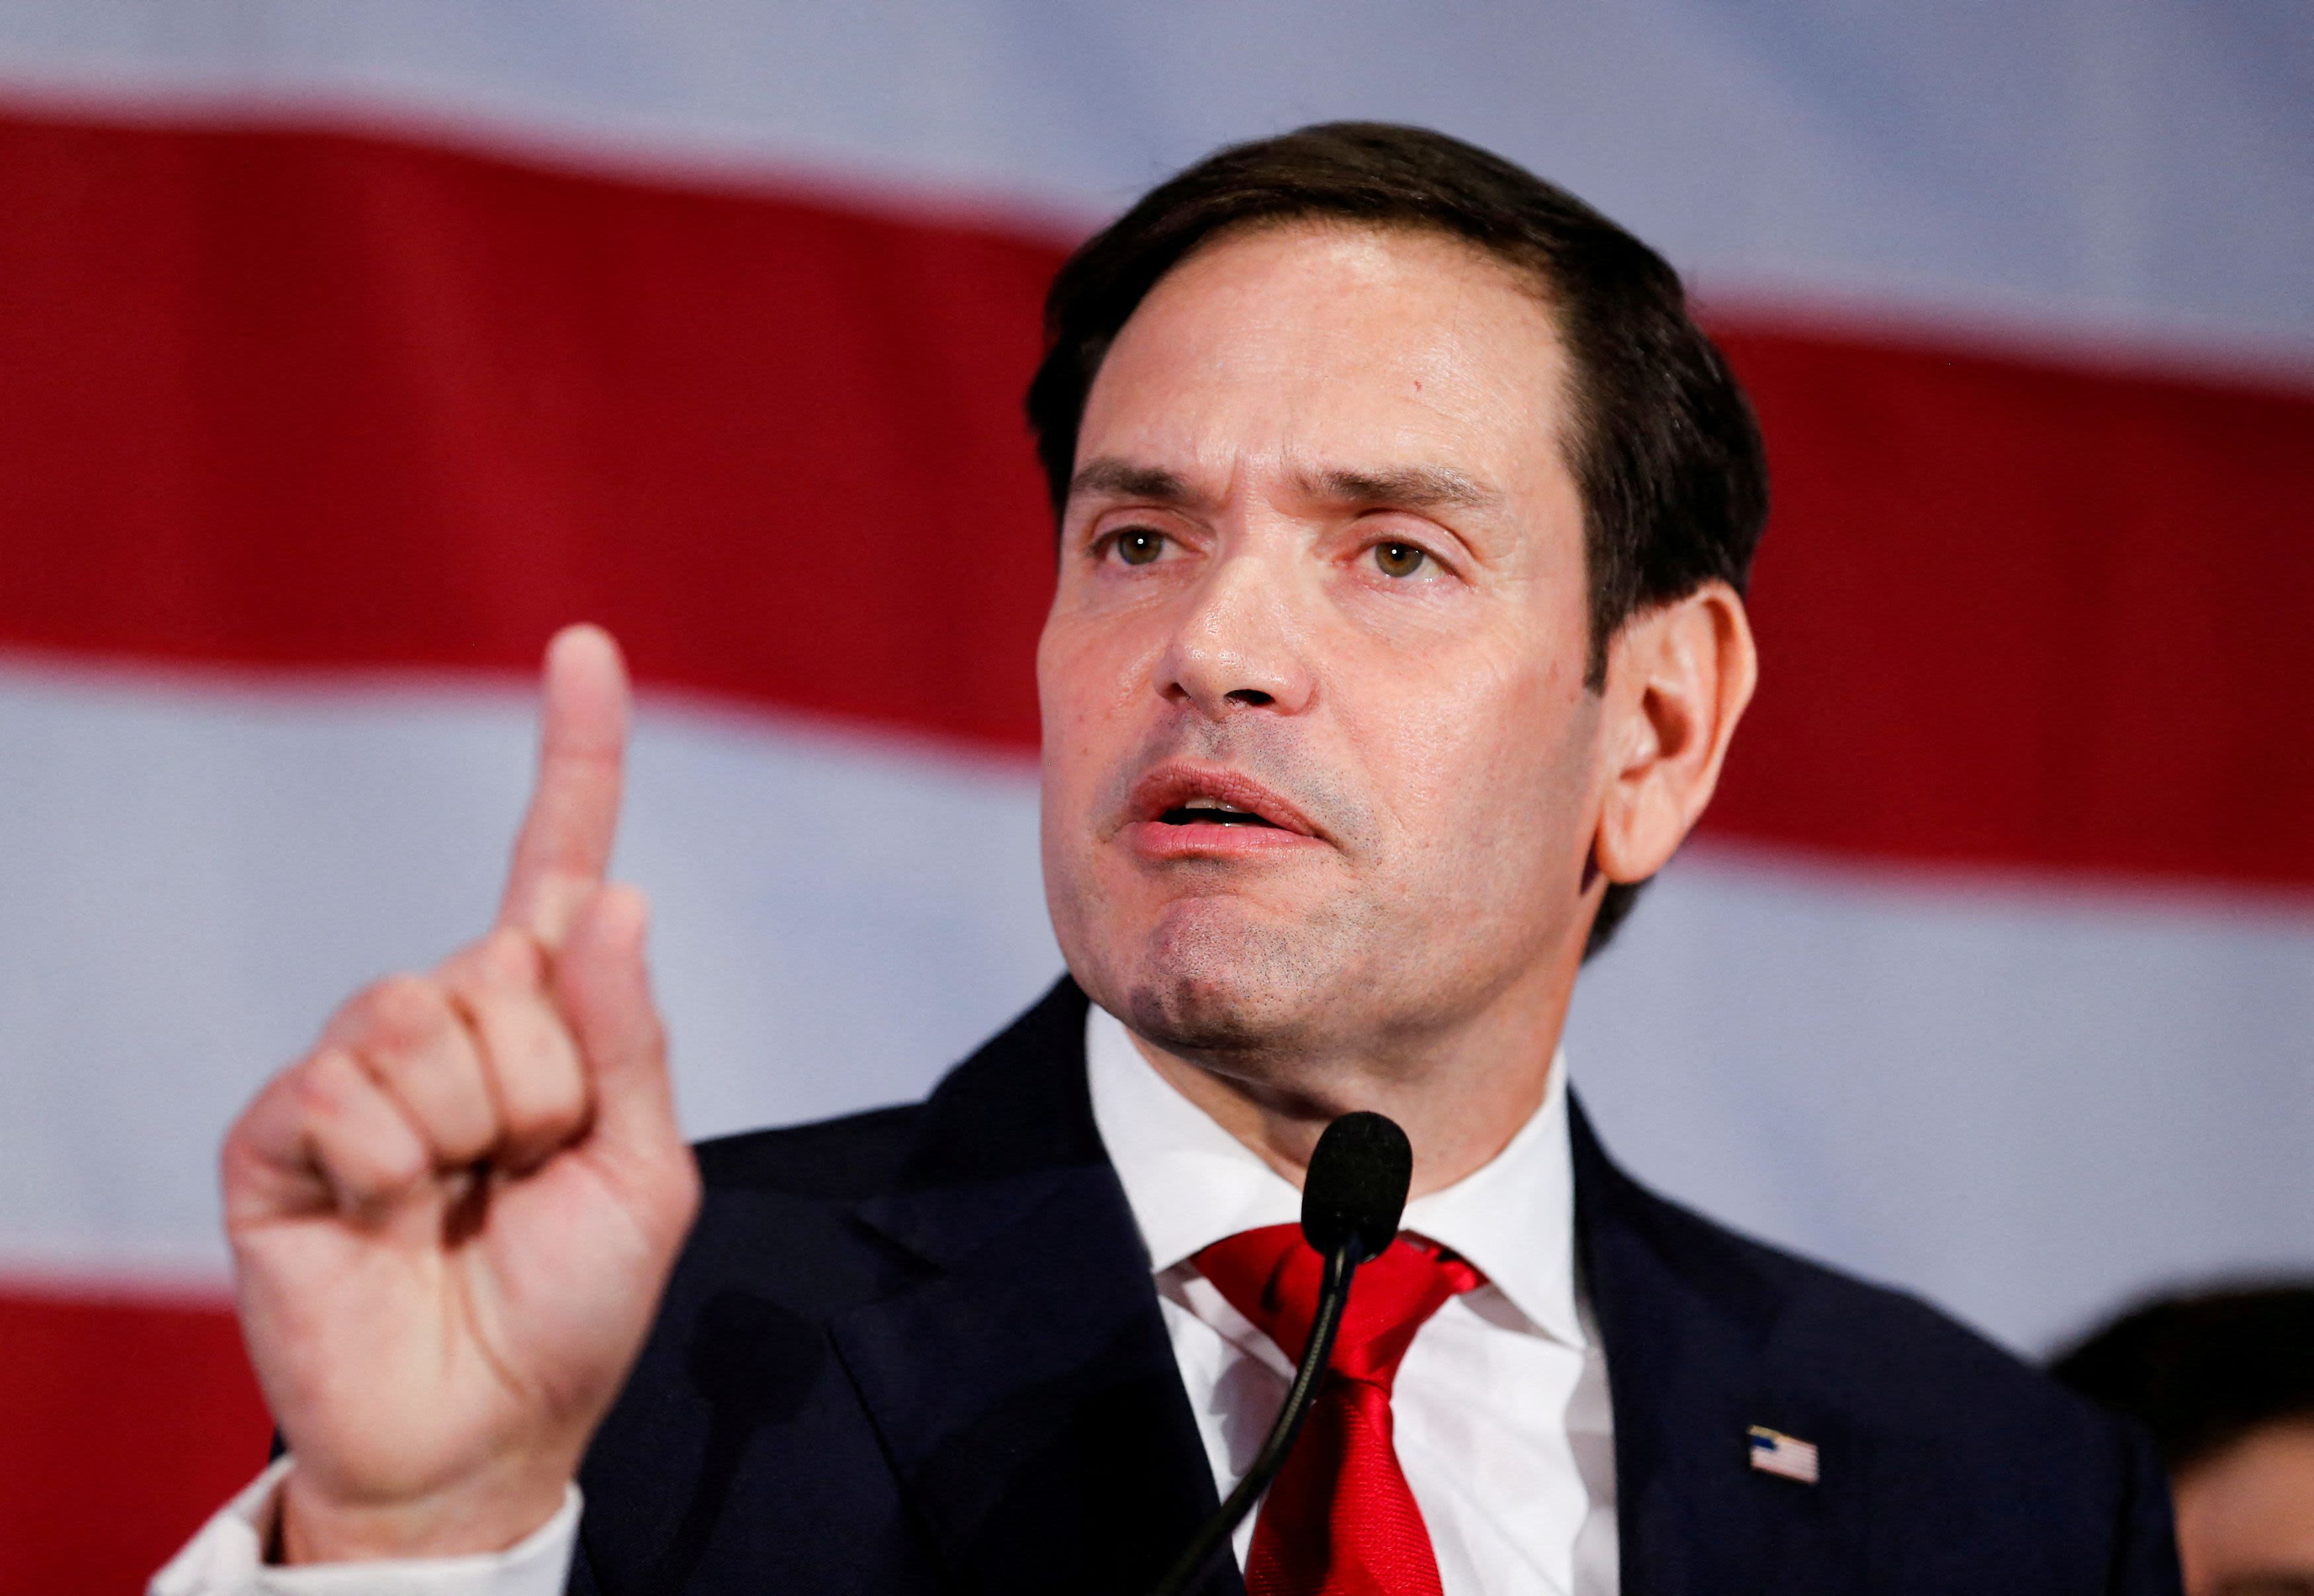 Analysis | Marco Rubio spreads debunked election claims about 2020 ballots